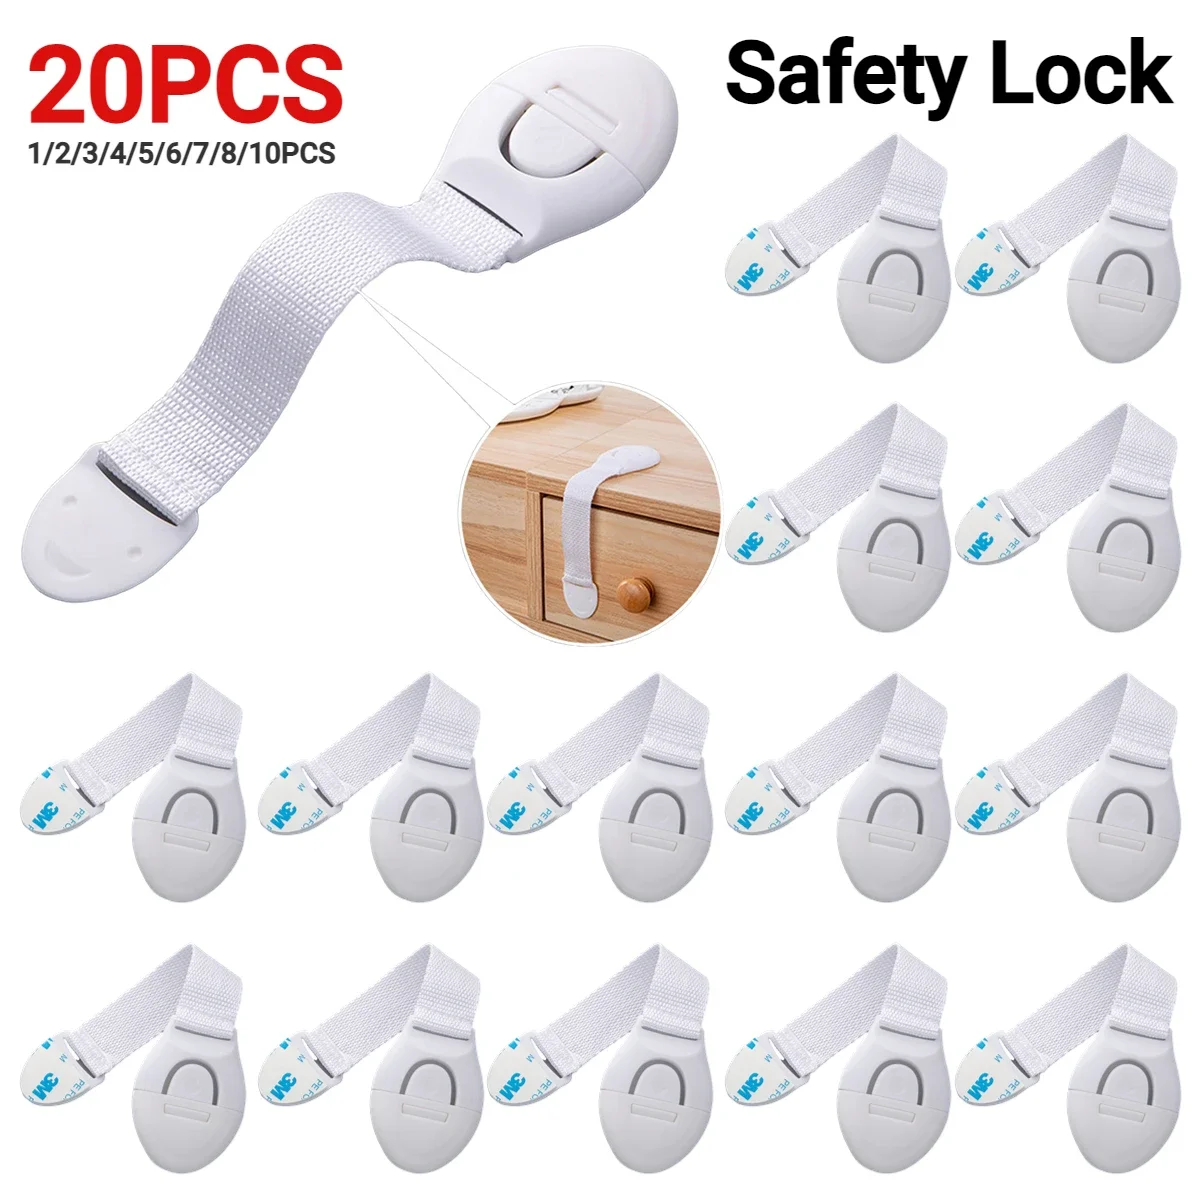 1-20PCS Child Safety Cabinet Lock Baby Security Protection Drawer Door Cabinet Lock Plastic Protection Kids Safety Door Lock